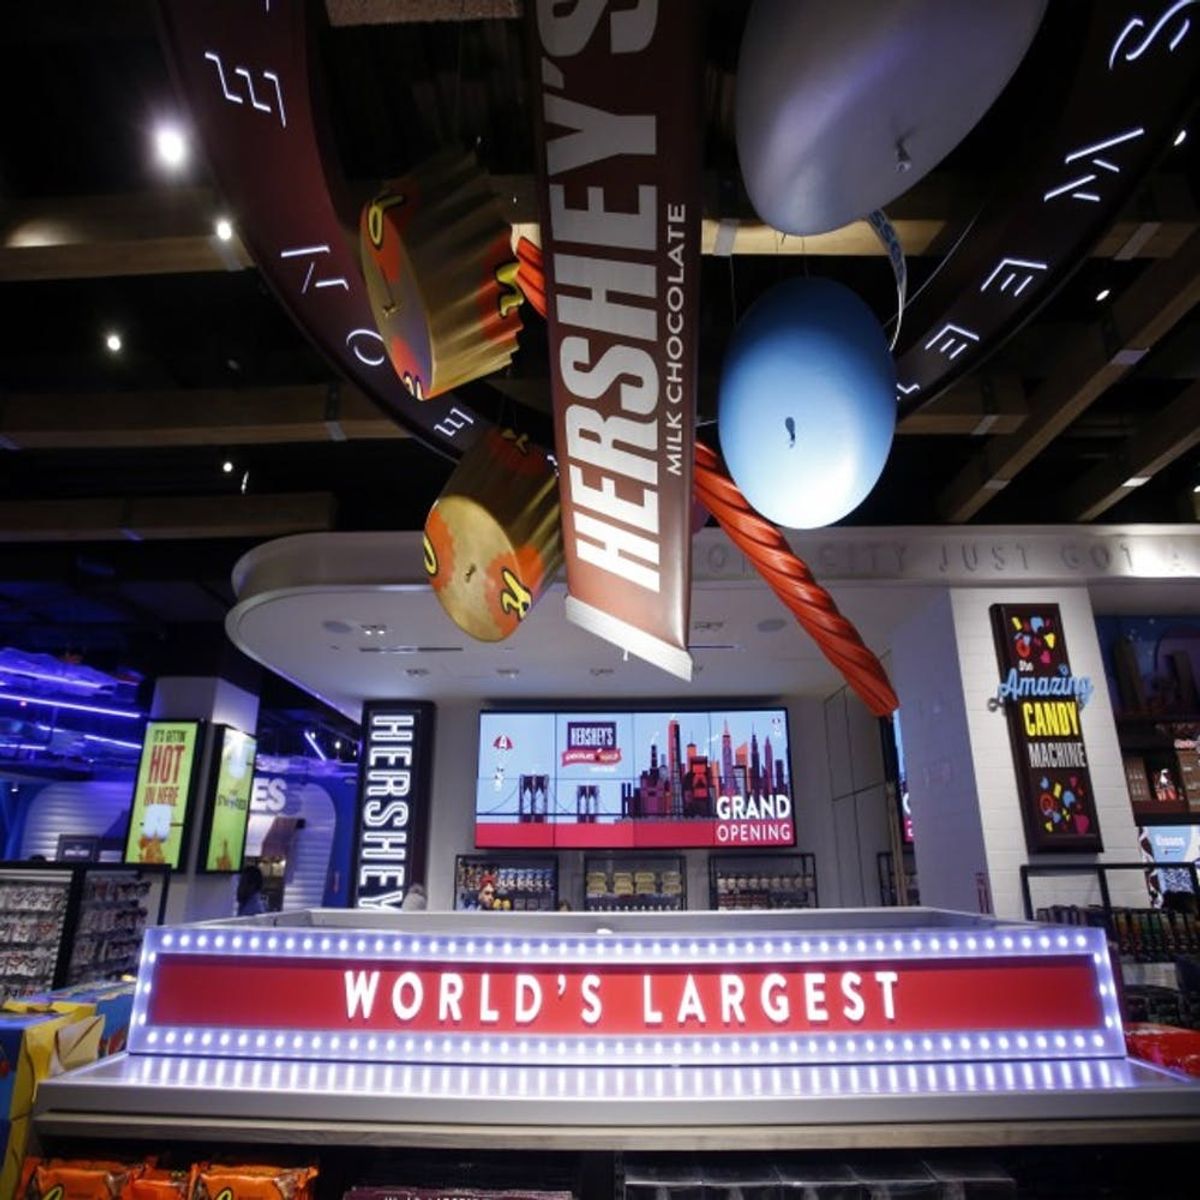 I Went to the Hershey’s Chocolate World Times Square Grand Opening – Here’s What You Can Expect